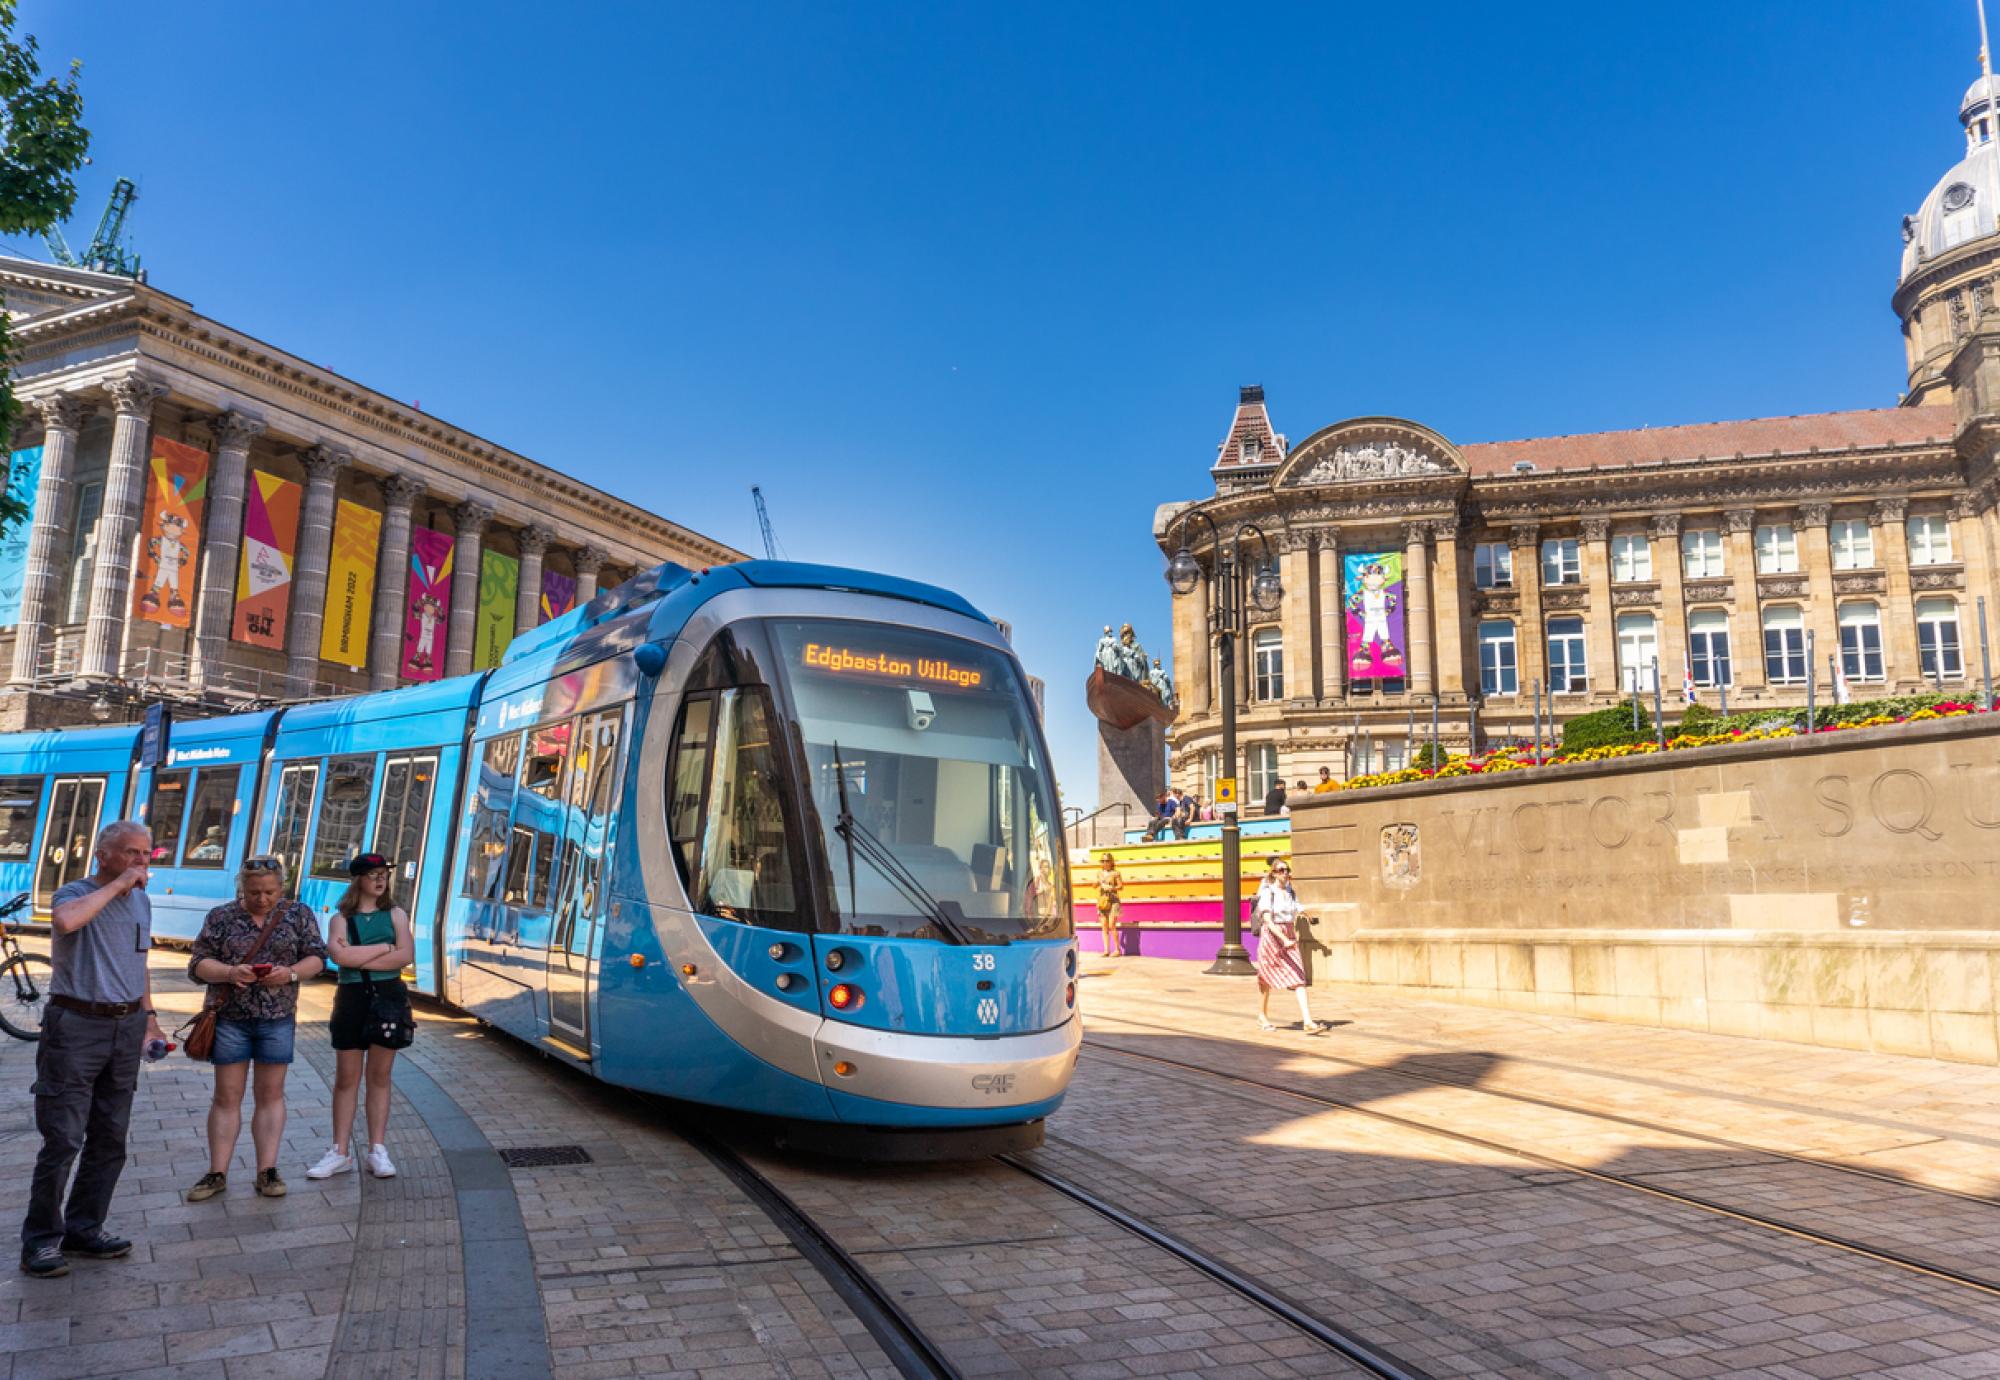 Image of Birmingham tram with City Hall in the background